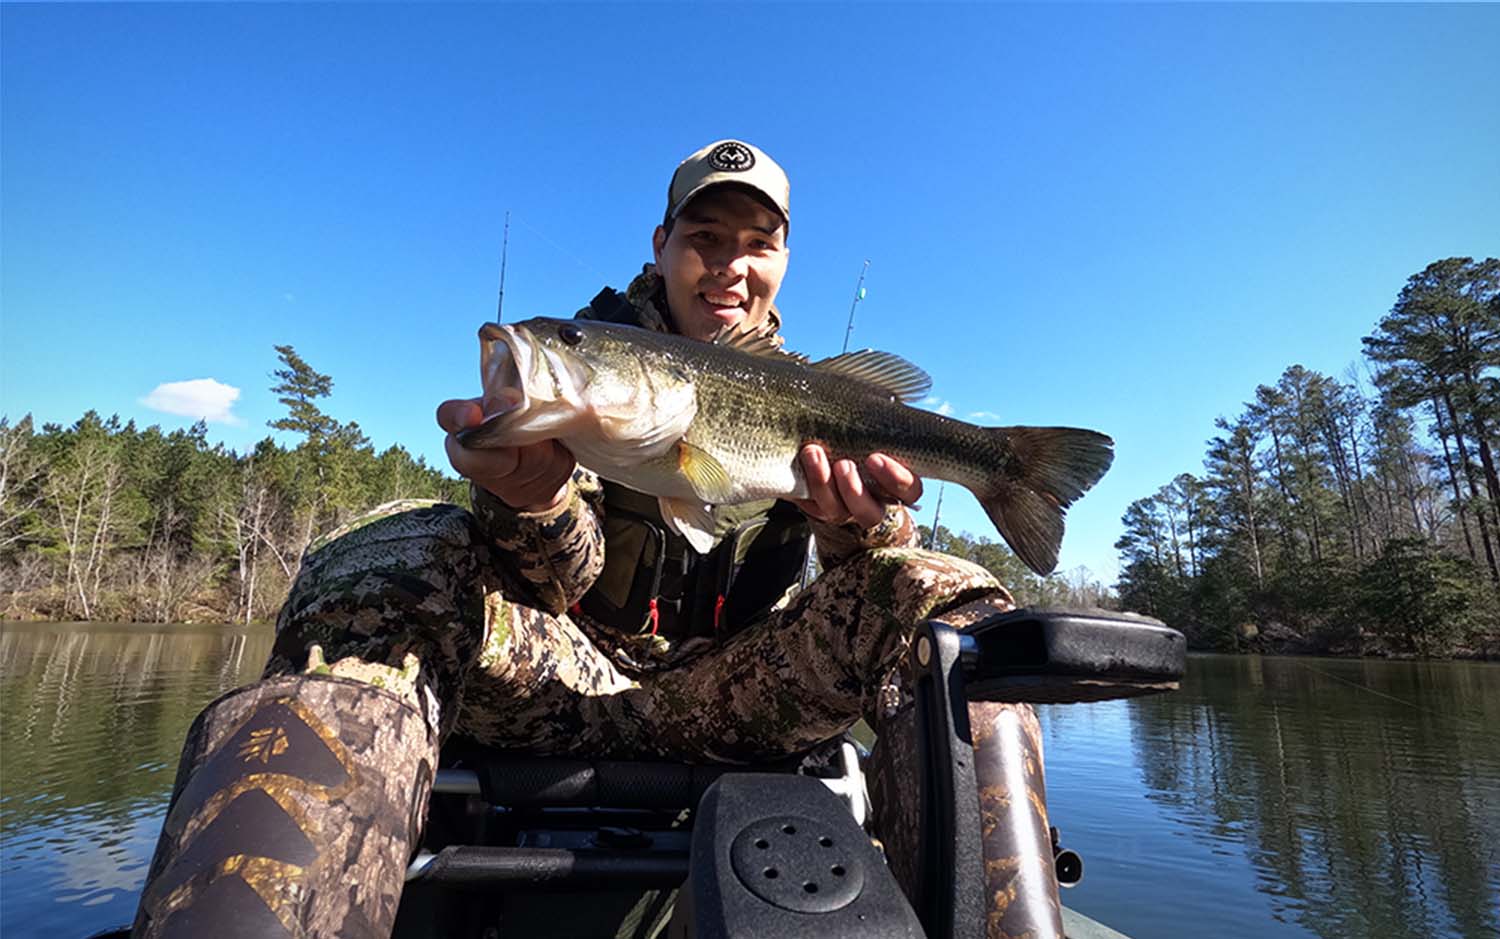 When pulling large bass from heavy cover, the best line to use is 50+ pound braid.